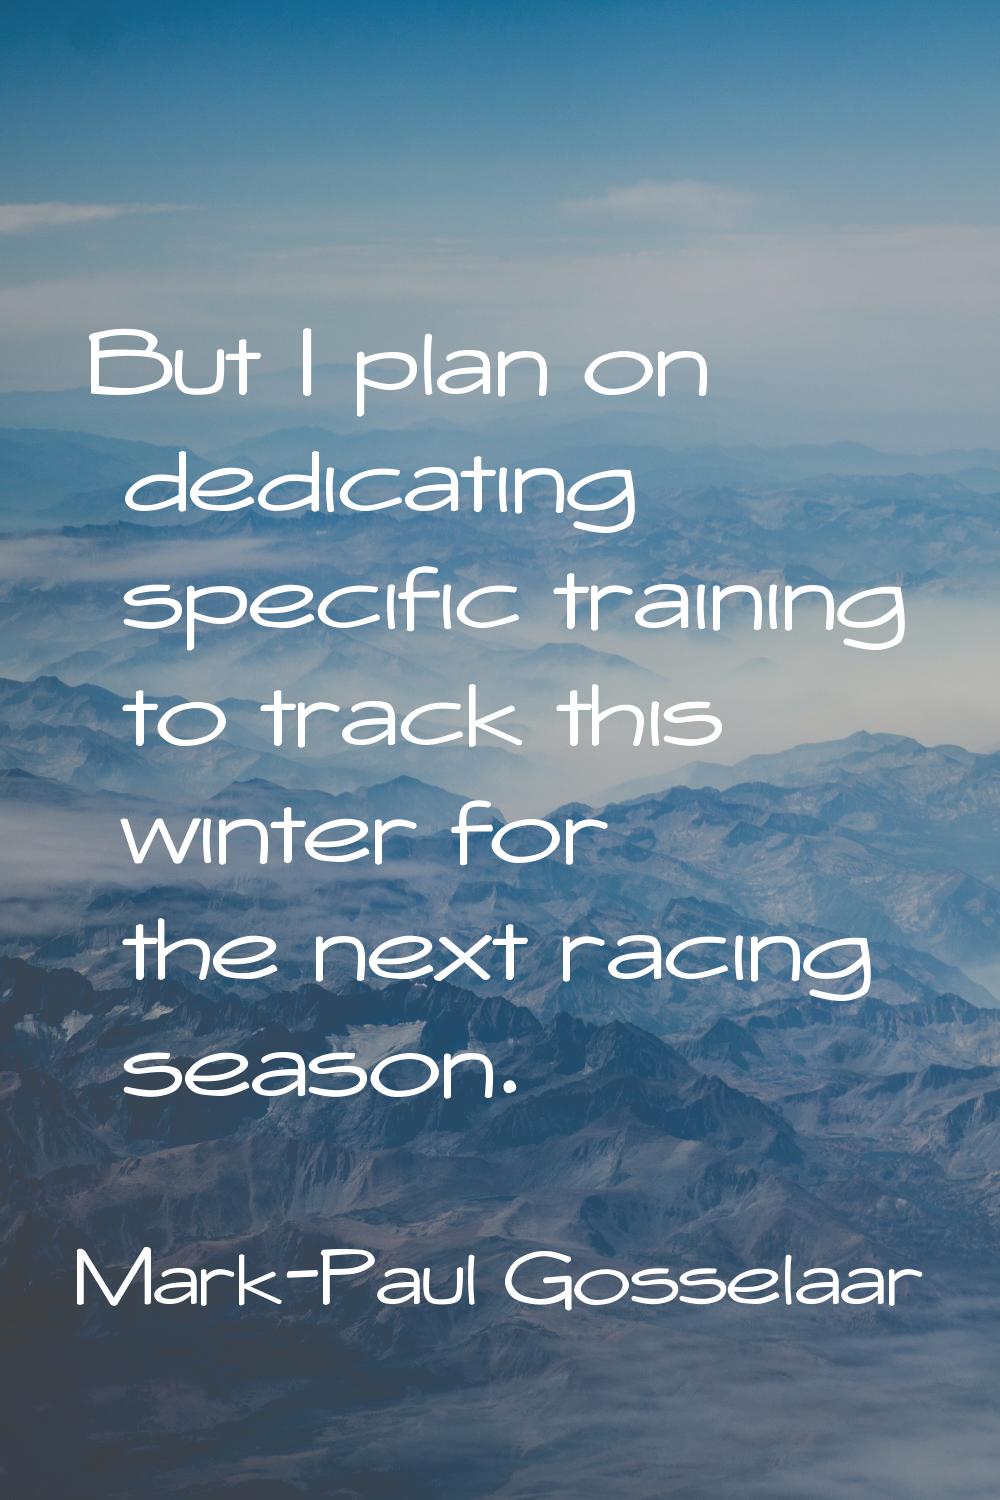 But I plan on dedicating specific training to track this winter for the next racing season.